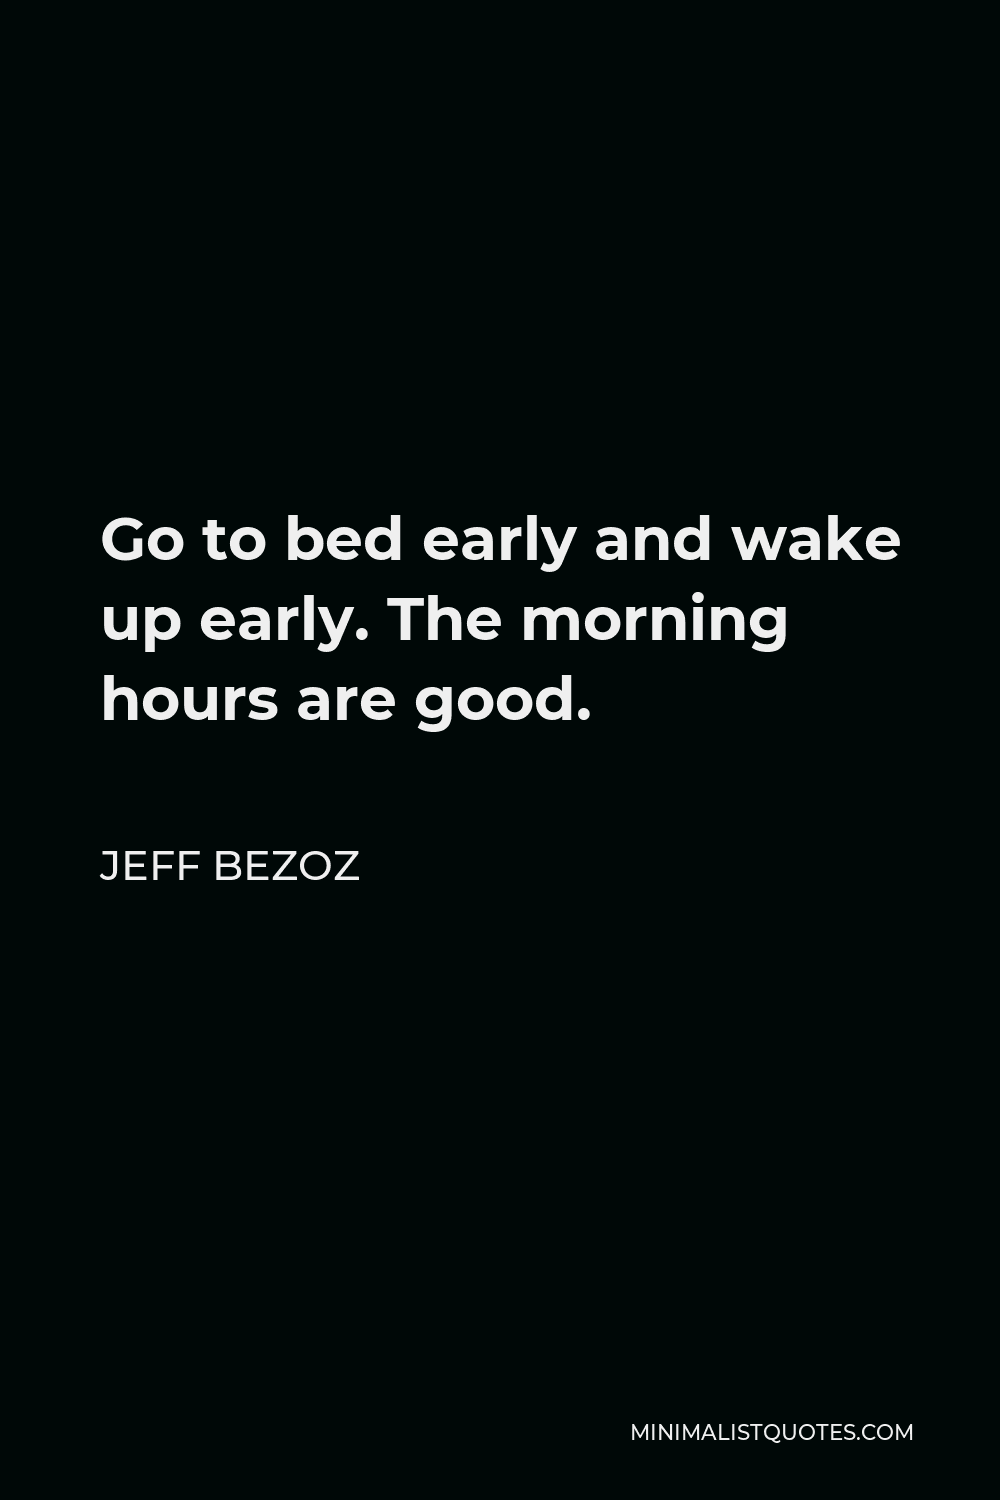 Jeff Bezoz Quote - Go to bed early and wake up early. The morning hours are good.